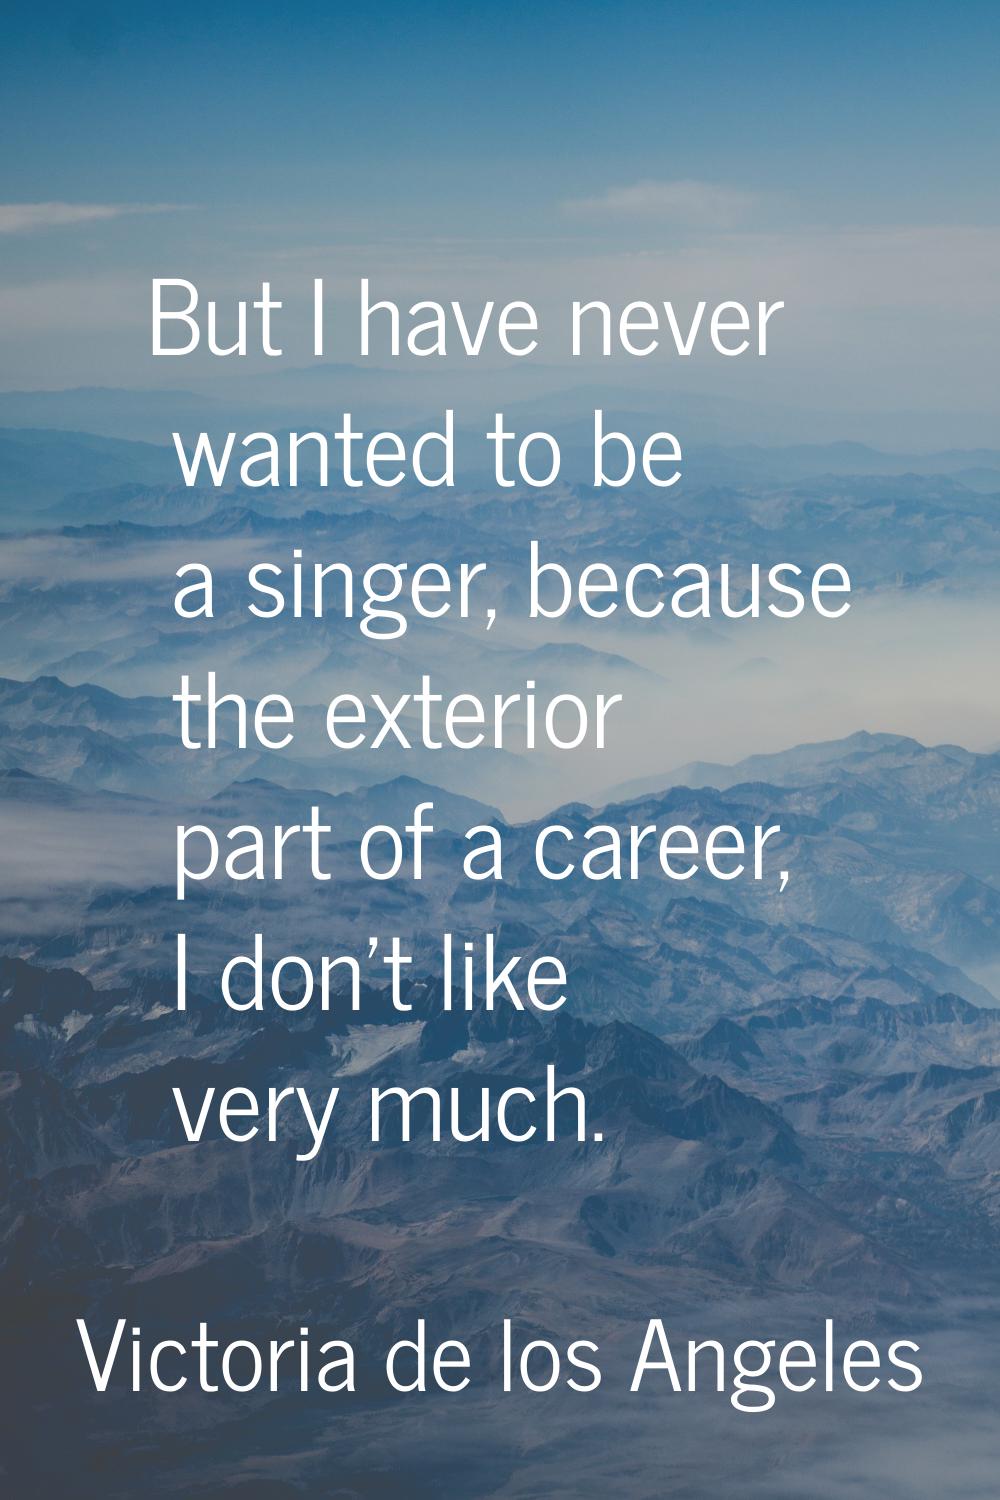 But I have never wanted to be a singer, because the exterior part of a career, I don't like very mu